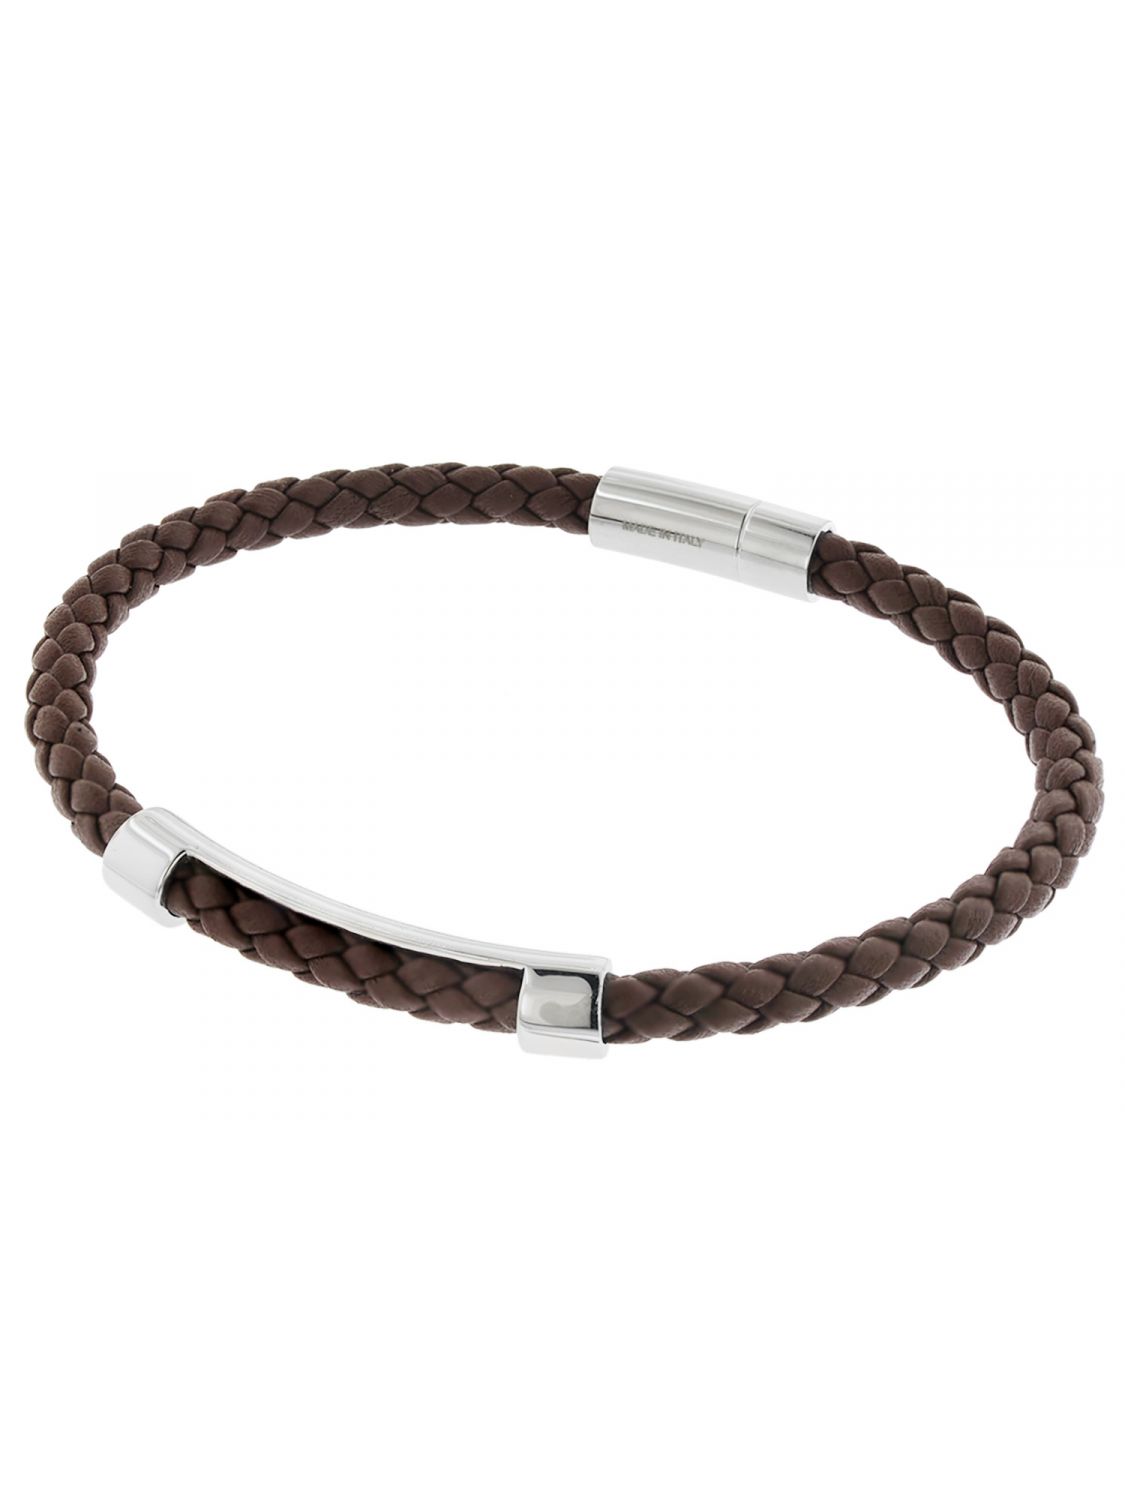 Hugo Boss Jewelry Men Stainless Steel & Light Brown Leather Leather Bracelet  - 1580046: Buy Online at Best Price in UAE - Amazon.ae